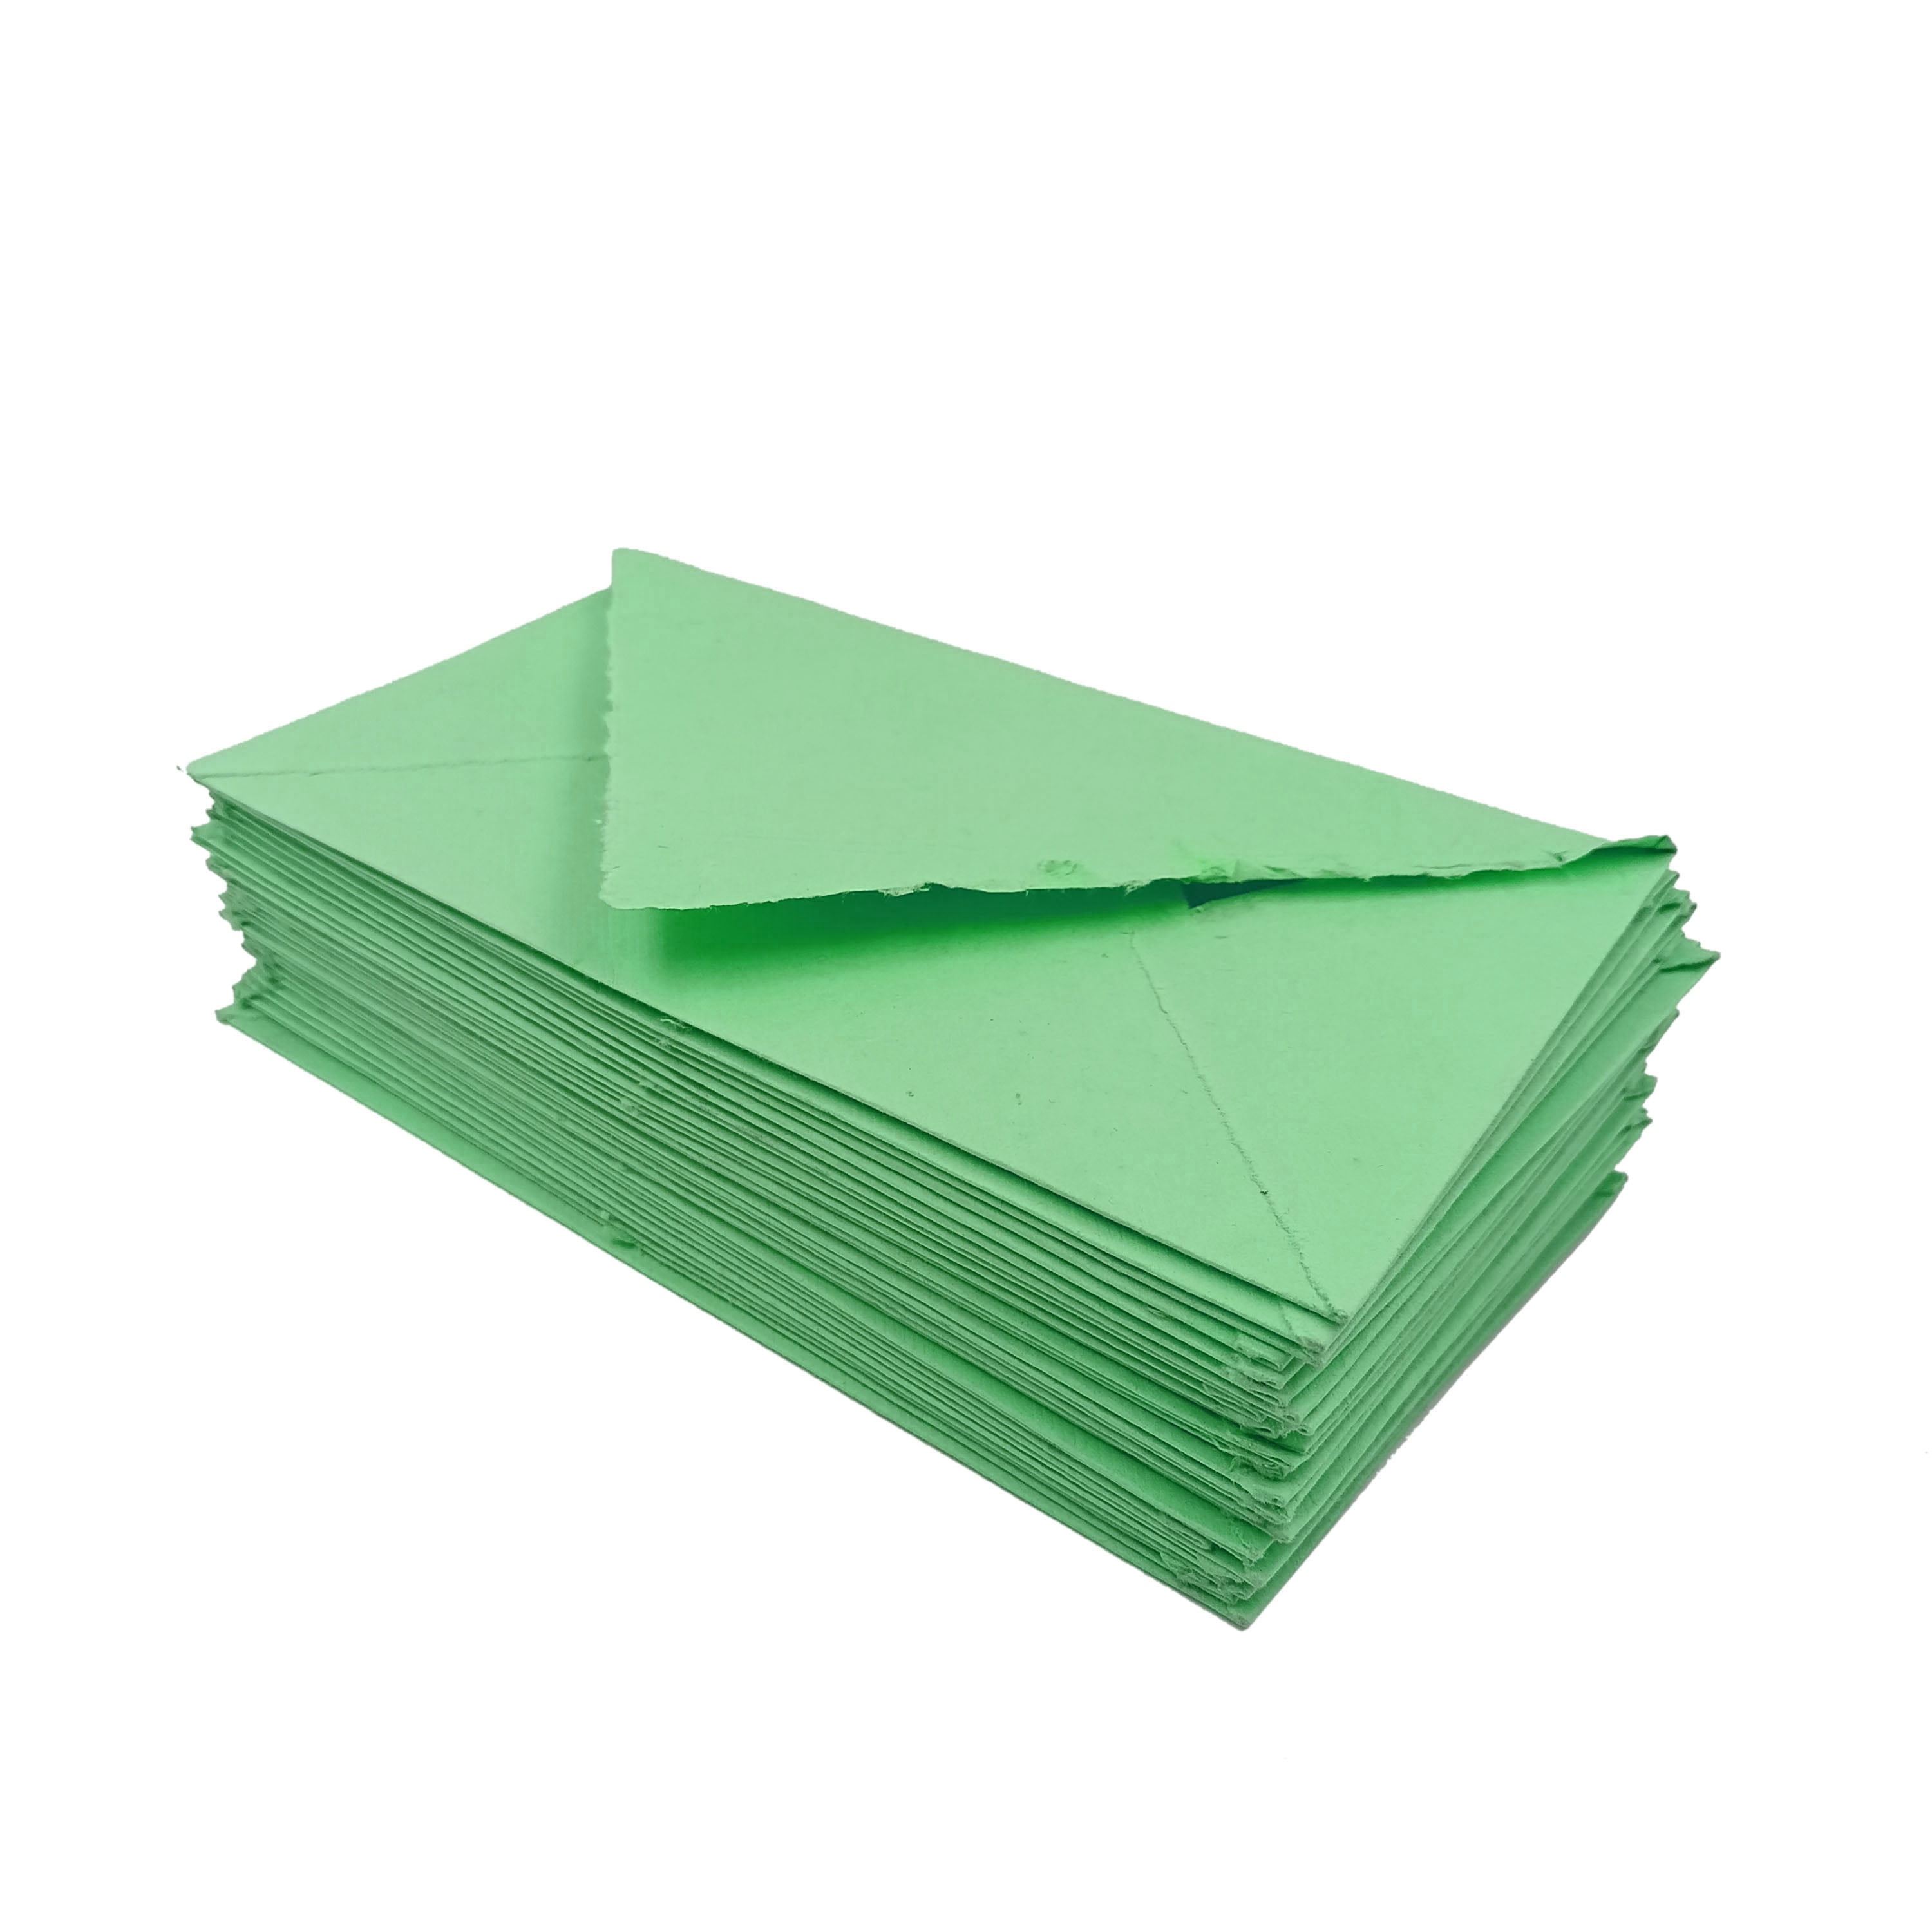 Handmade Cotton Rag Textured Paper Envelopes Deckle Edge-Thick 150 GSM  Recycled Khadi Paper-Green, Size: 9x5, Pack of: 10- (ENVL-D-105)